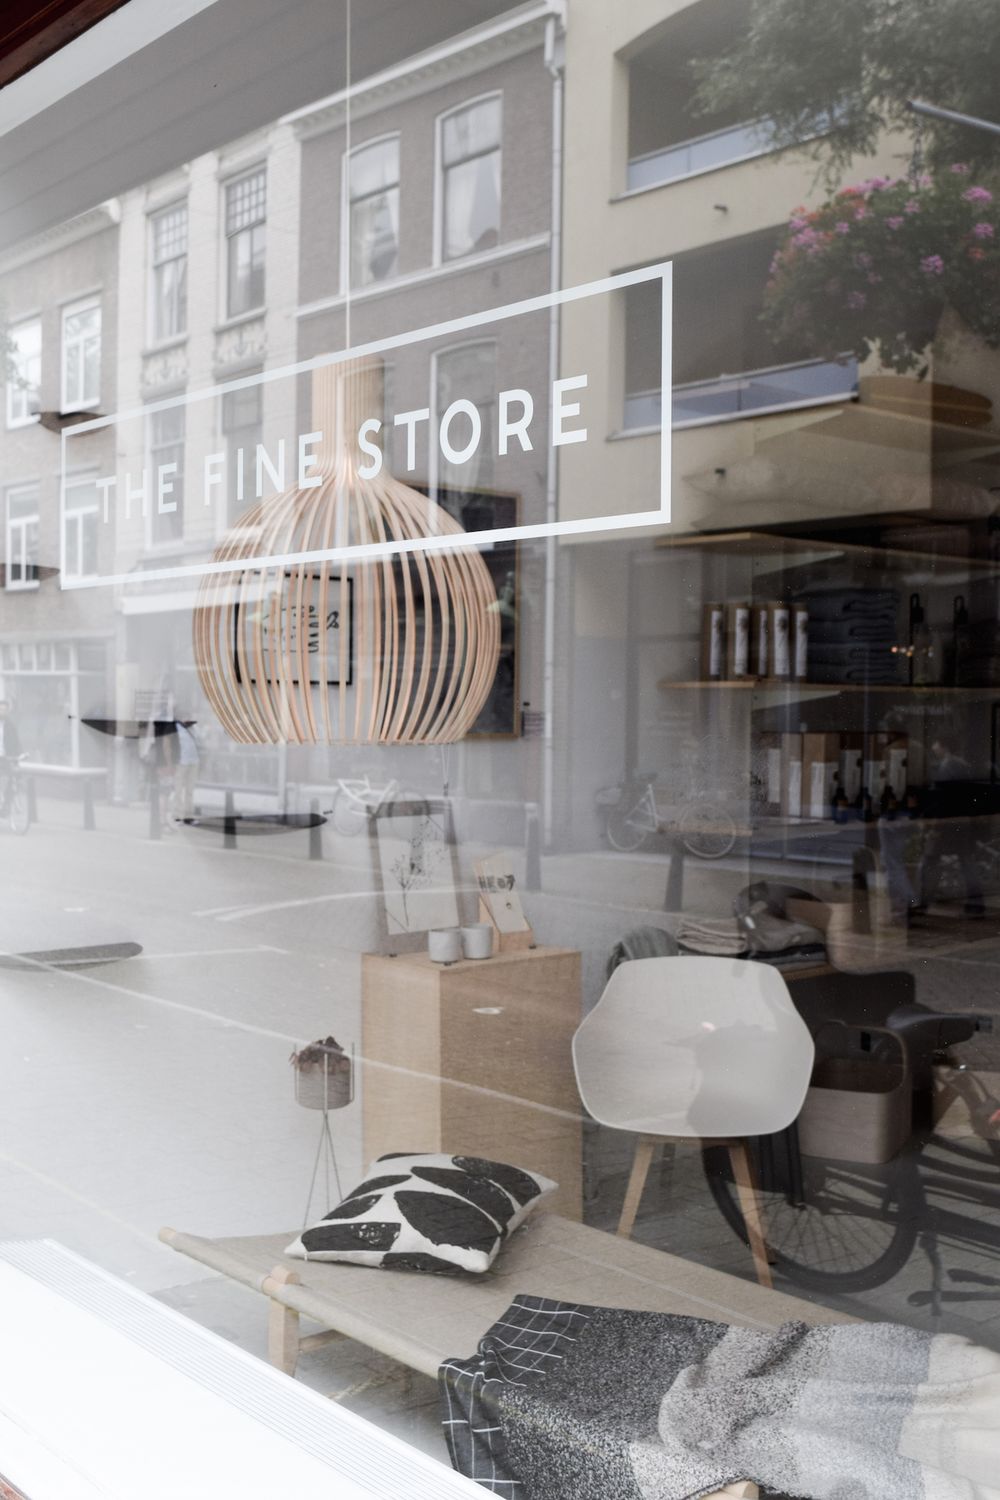 The Fine Store, The Hague